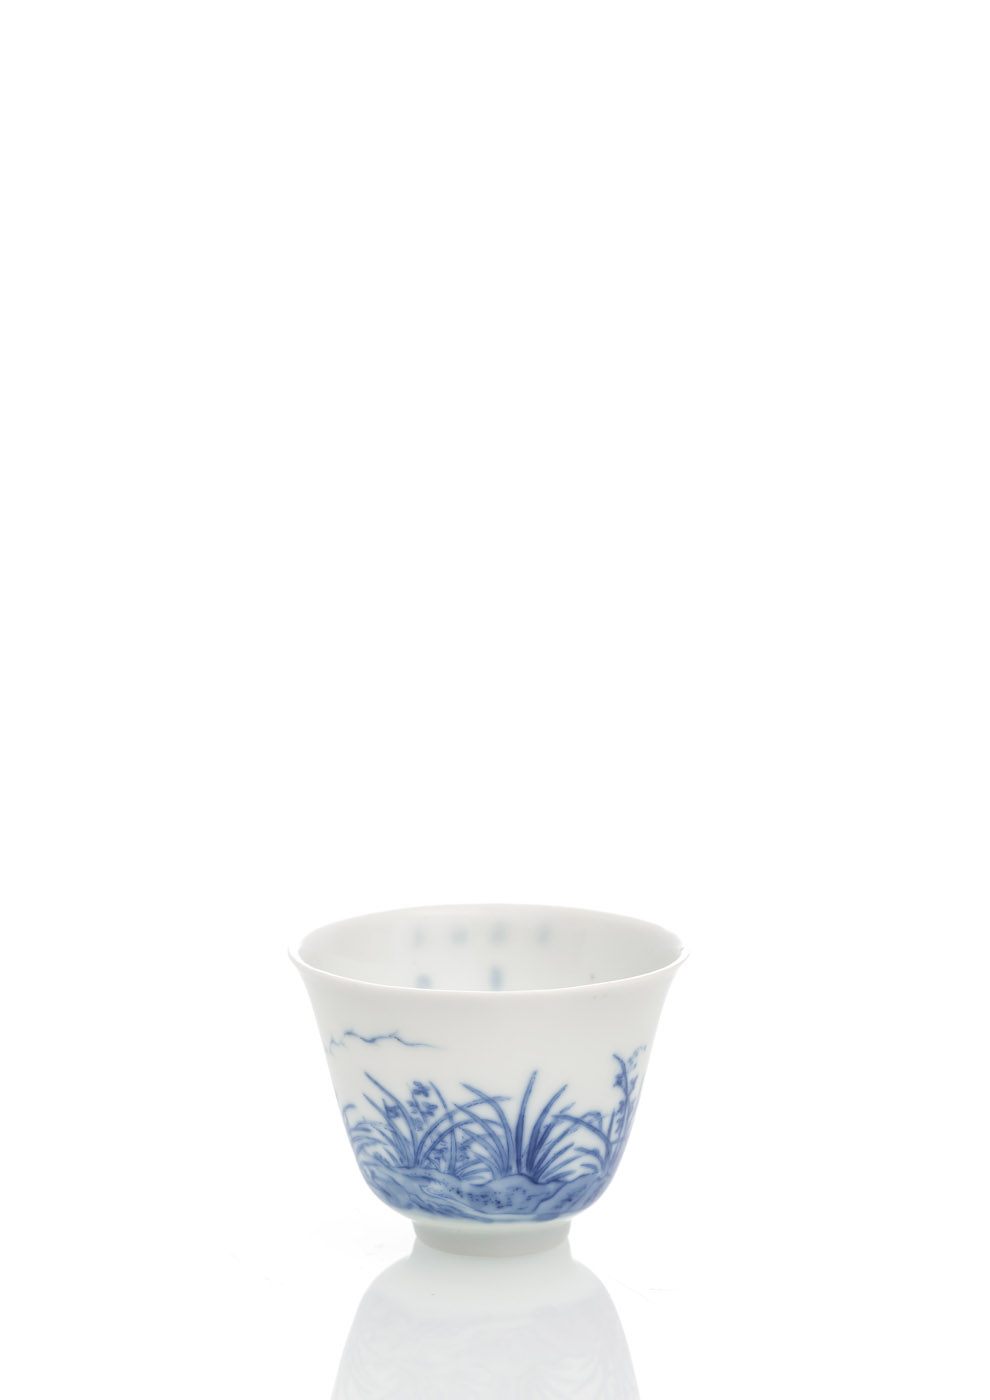 <b>A FINE BLUE AND WHITE MONTH CUP</b>